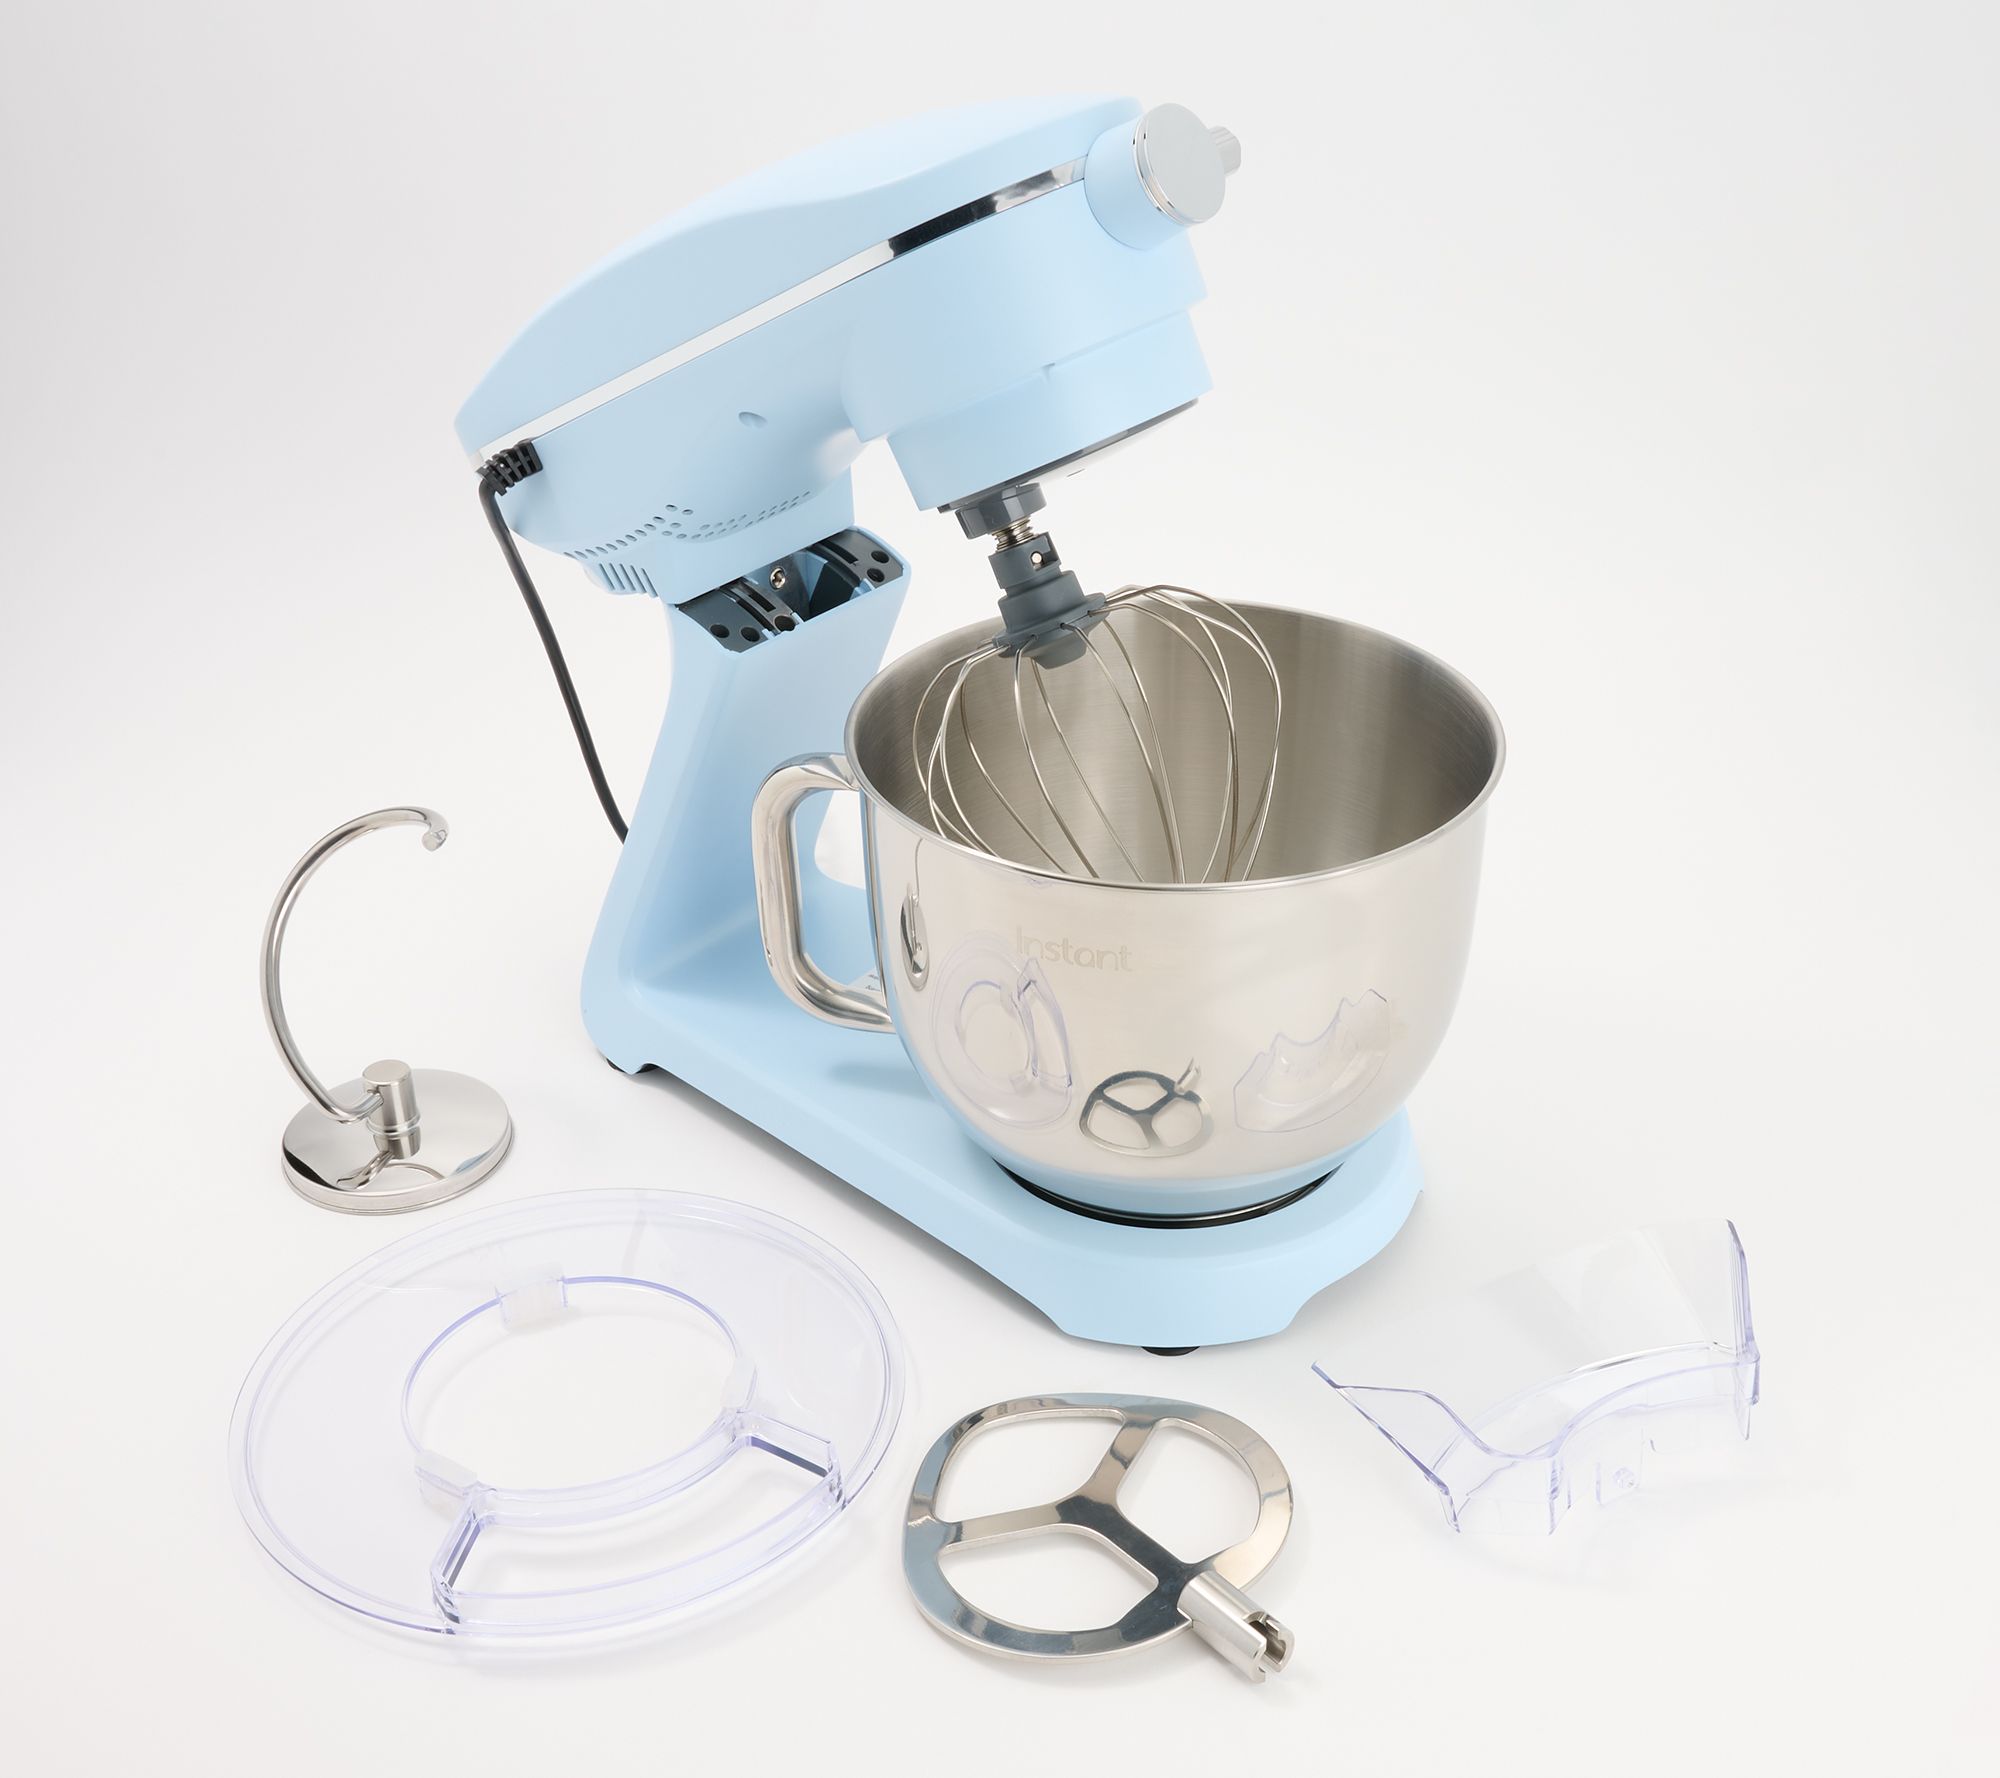 Instant® 7.4-quart Stand Mixer Pro Series, Ice Blue